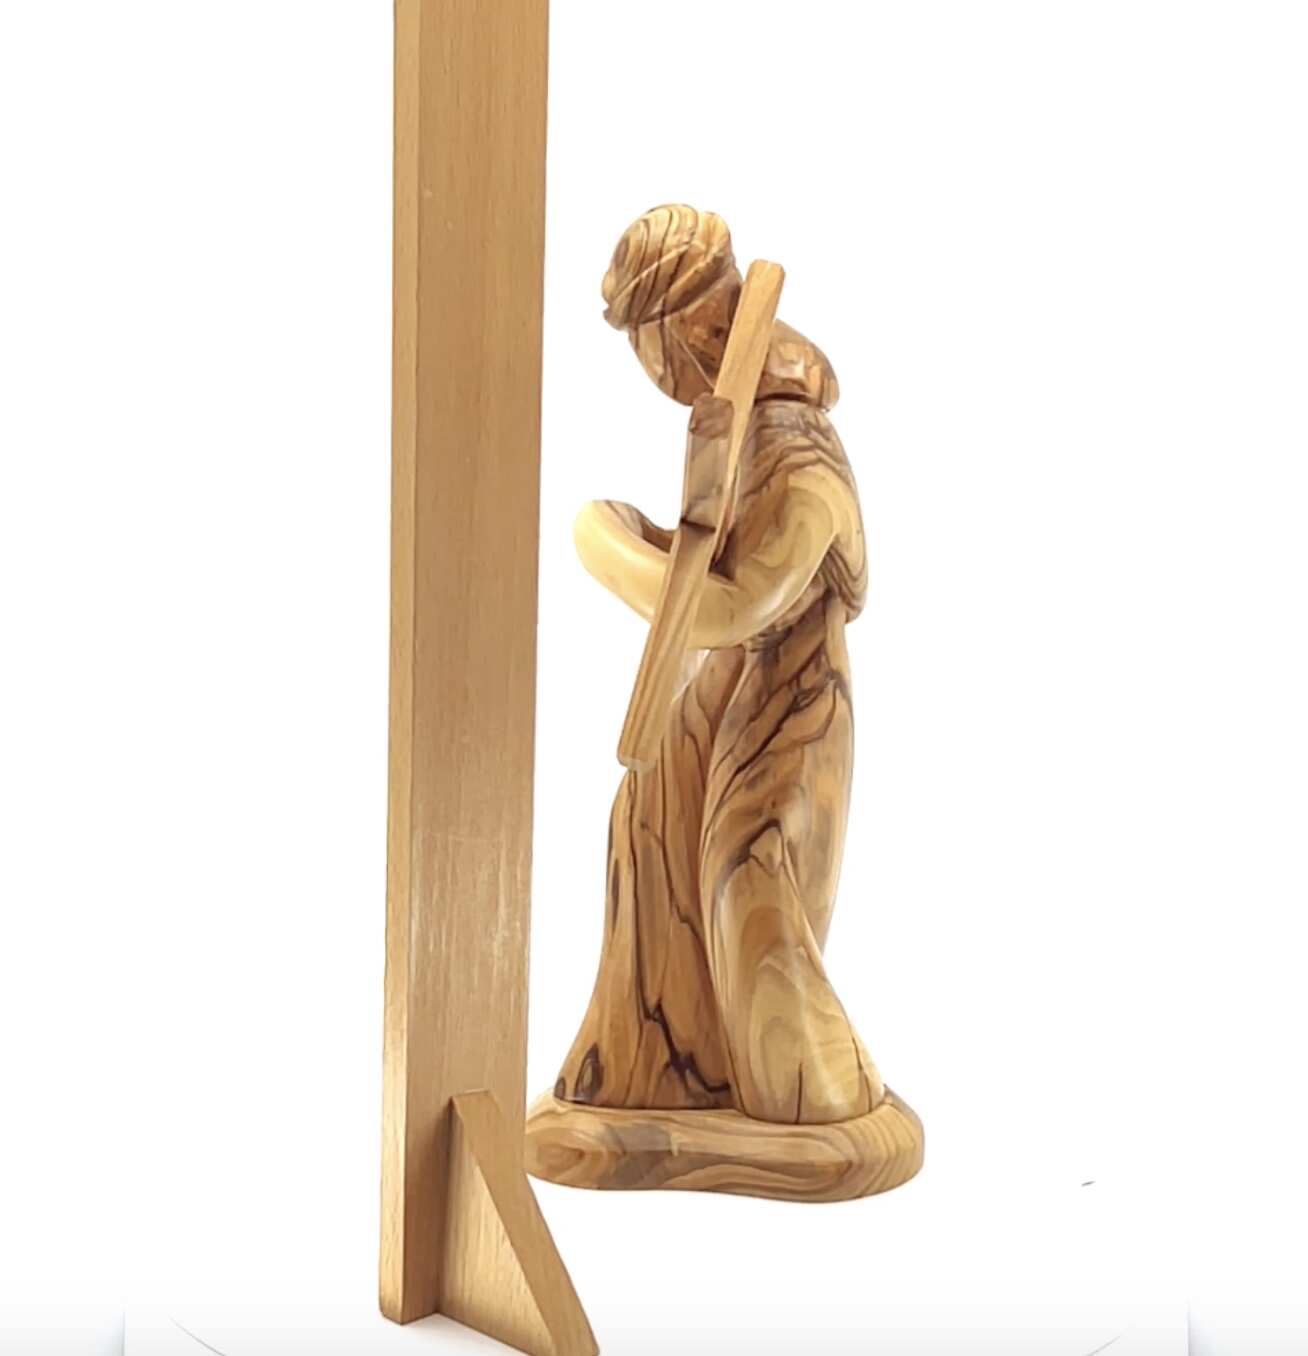 Jesus Christ "Holding Cross", 9.1" Carving in Olive Wood from Holy Land